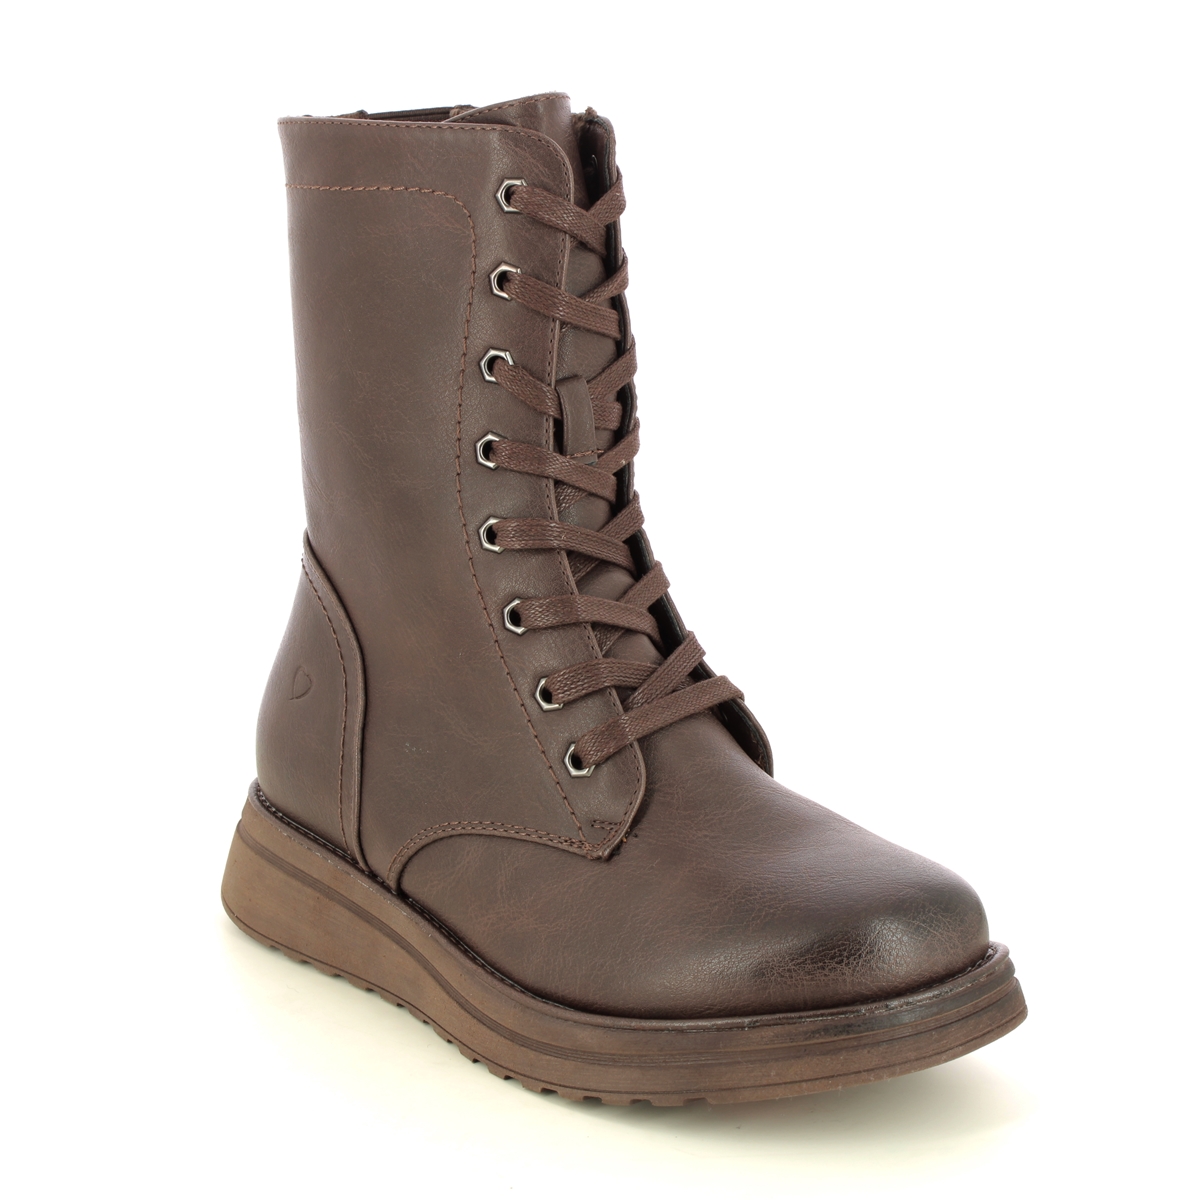 Heavenly Feet Martina Walker Chocolate Brown Womens Lace Up Boots 3509-27 In Size 7 In Plain Chocolate Brown